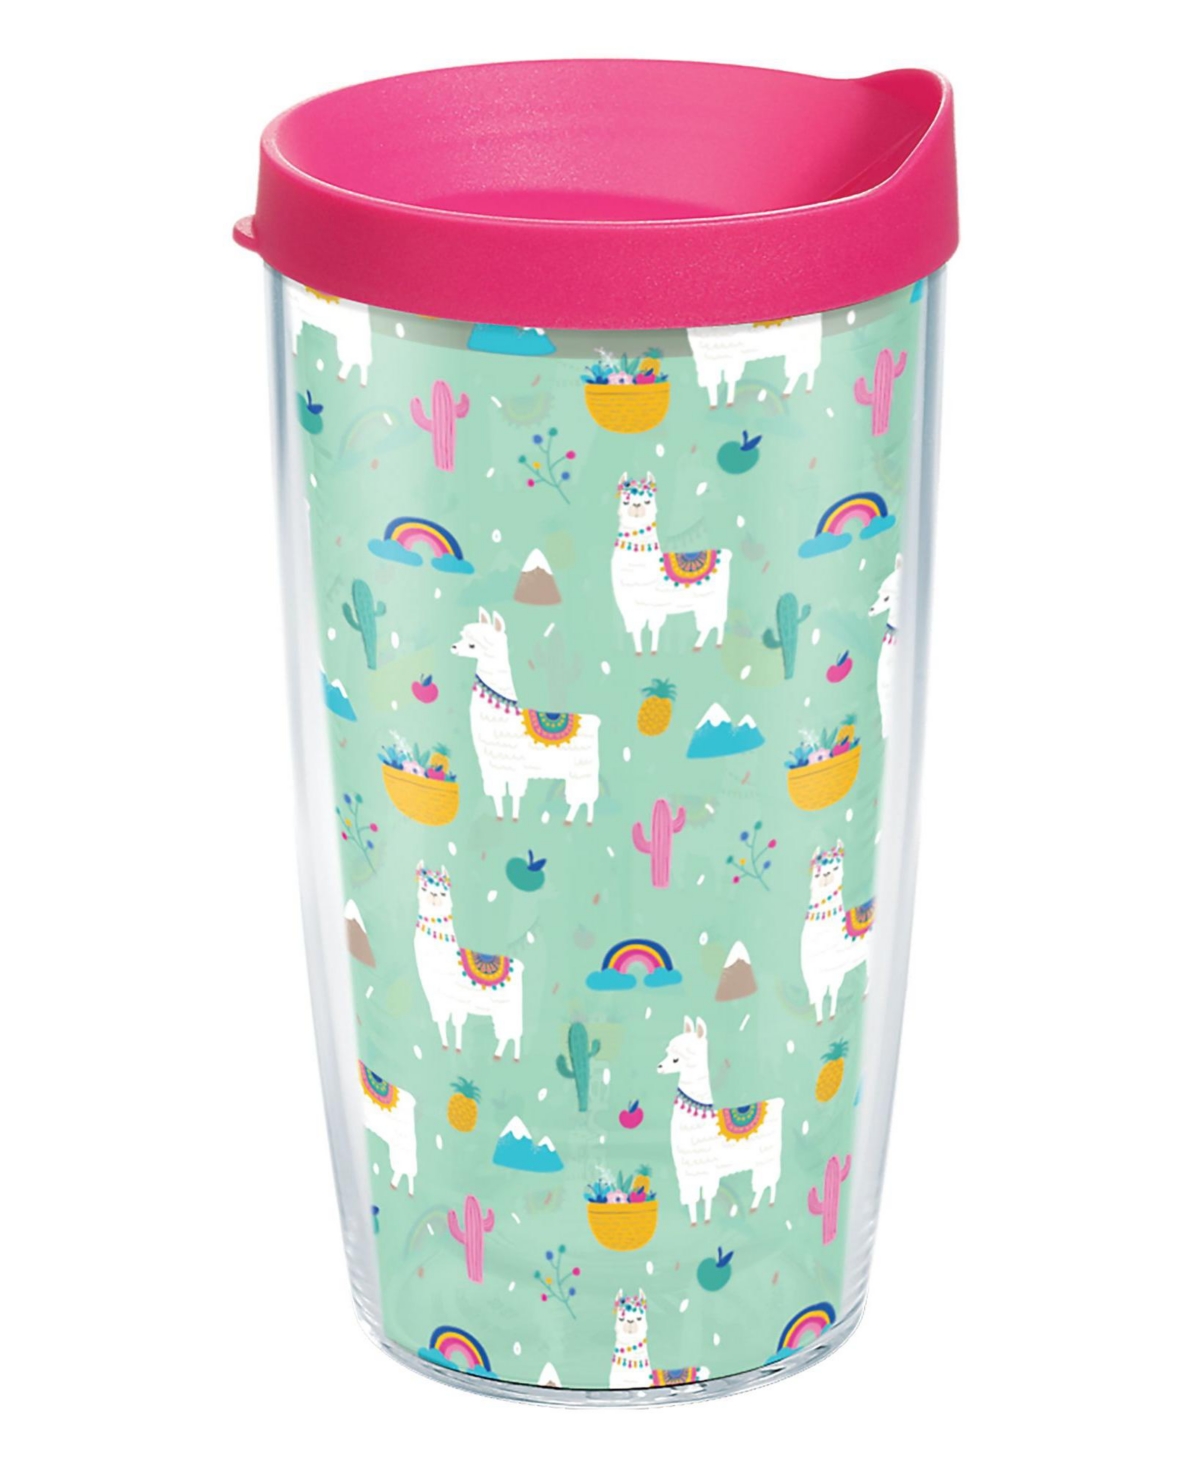 Tervis Tumbler Tervis Llama Pattern Made In Usa Double Walled Insulated Tumbler Travel Cup Keeps Drinks Cold & Hot, In Open Miscellaneous